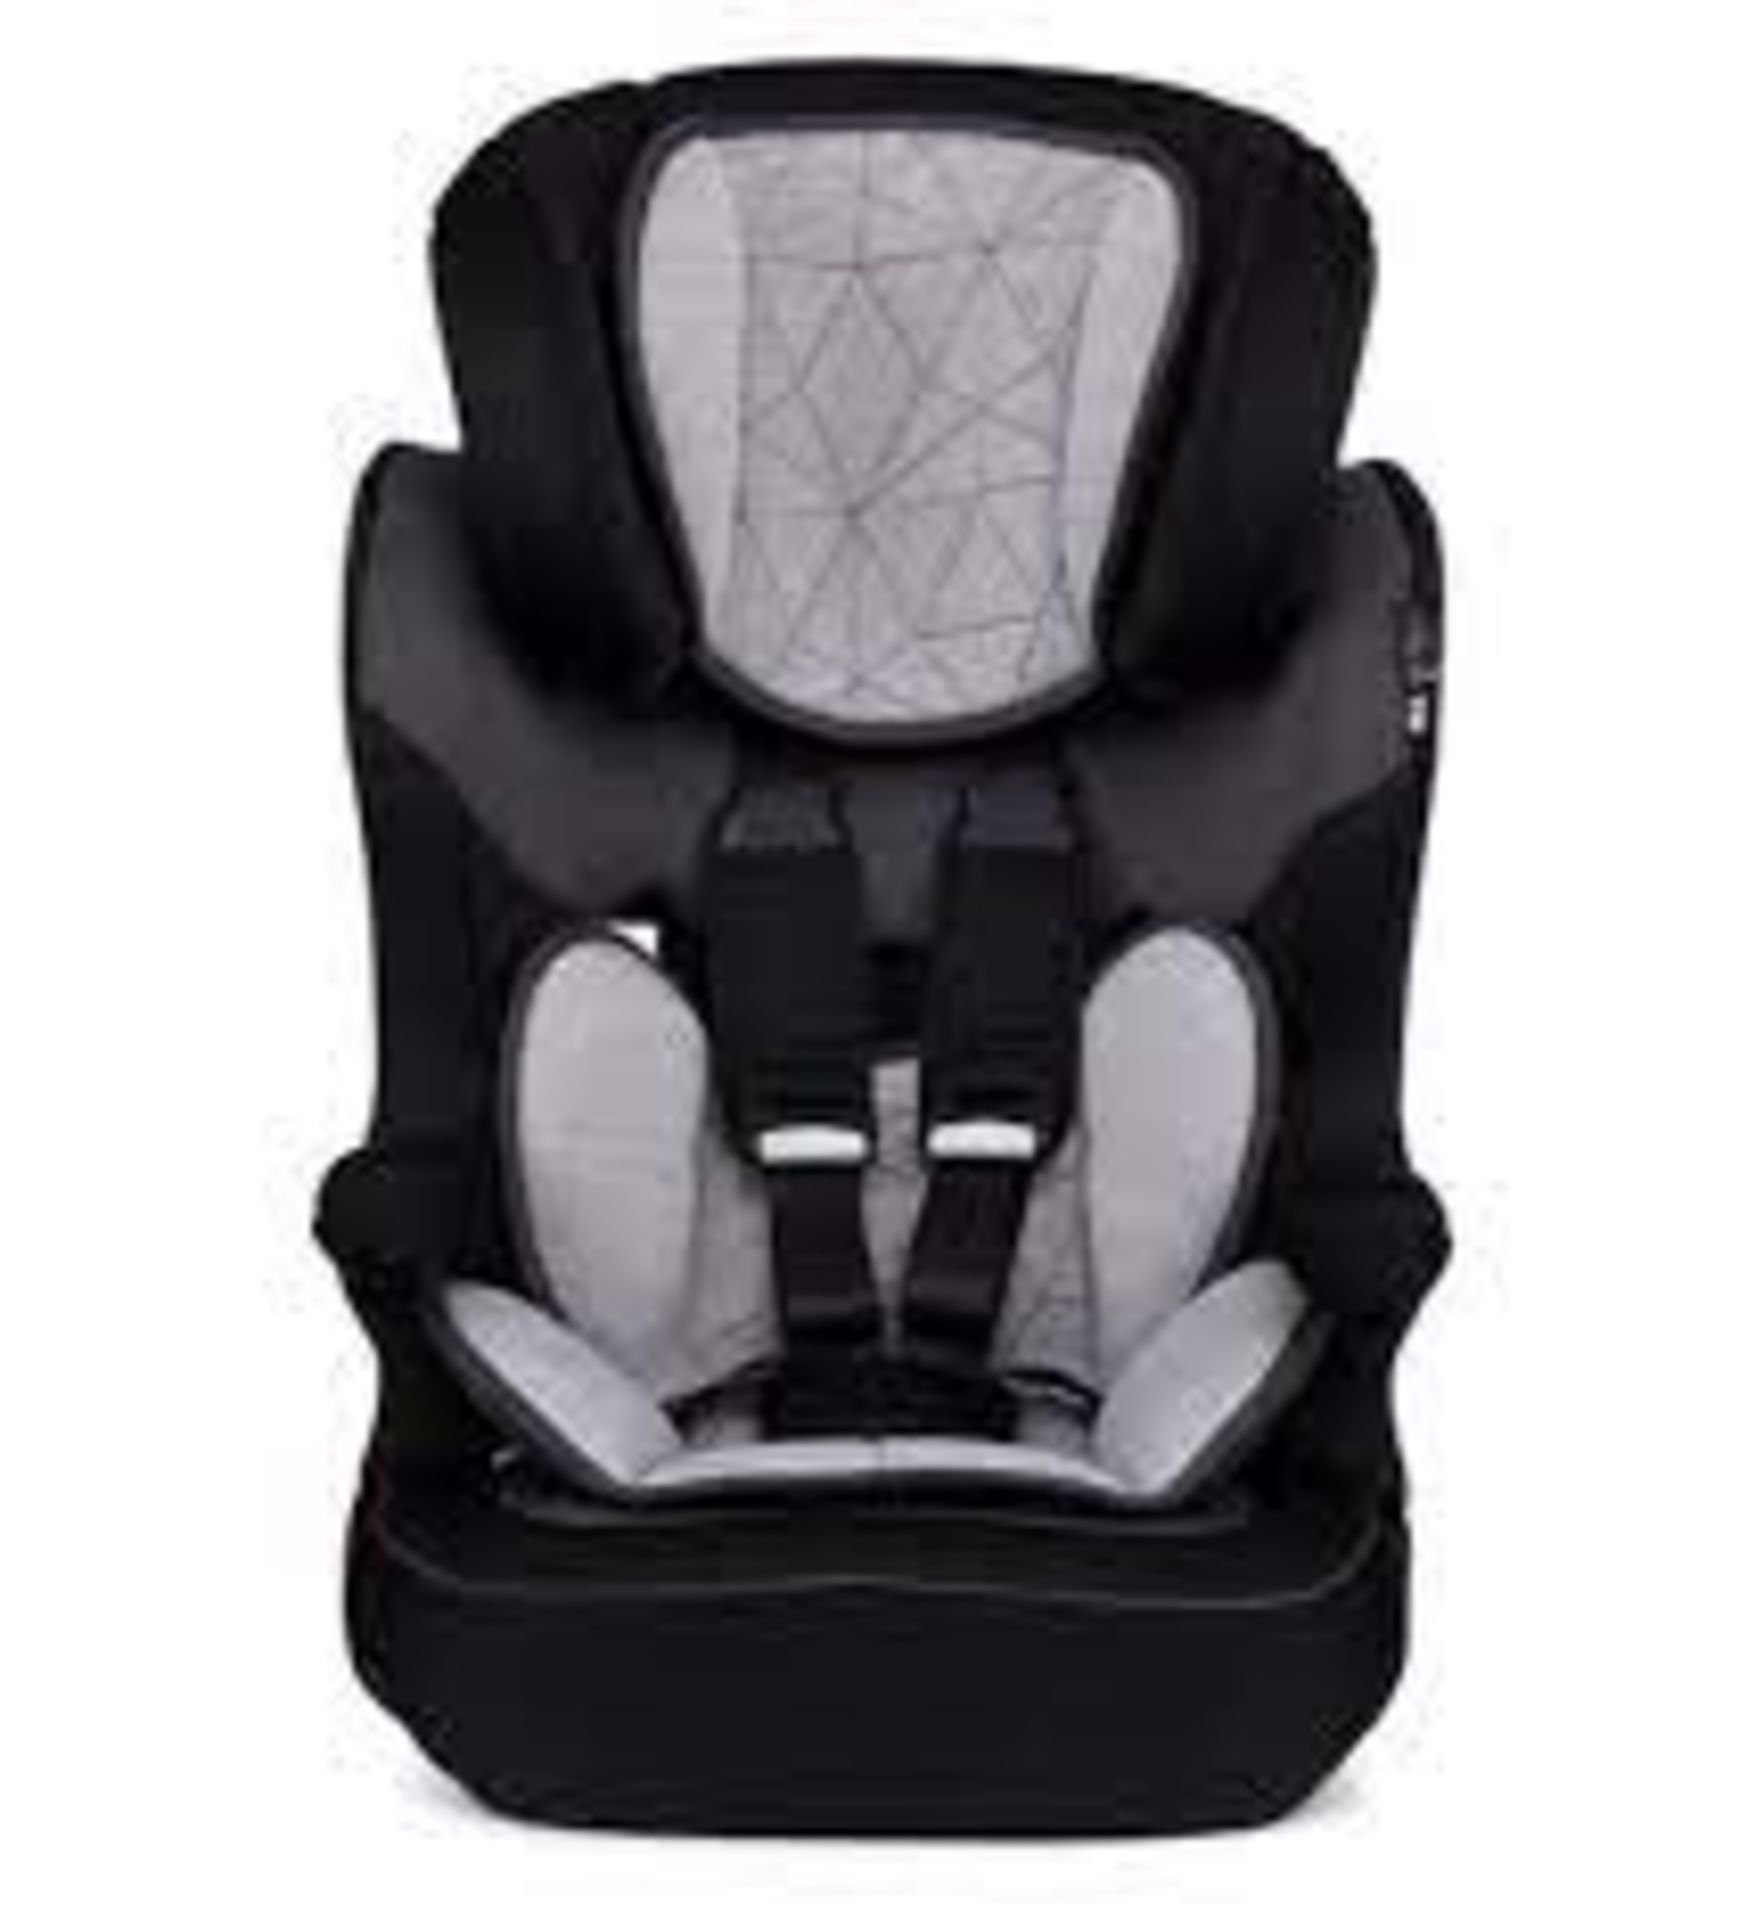 BRAND NEW MOTHERCARE ADVANCE XP BLACK AND GREY CAR SEAT R2-6